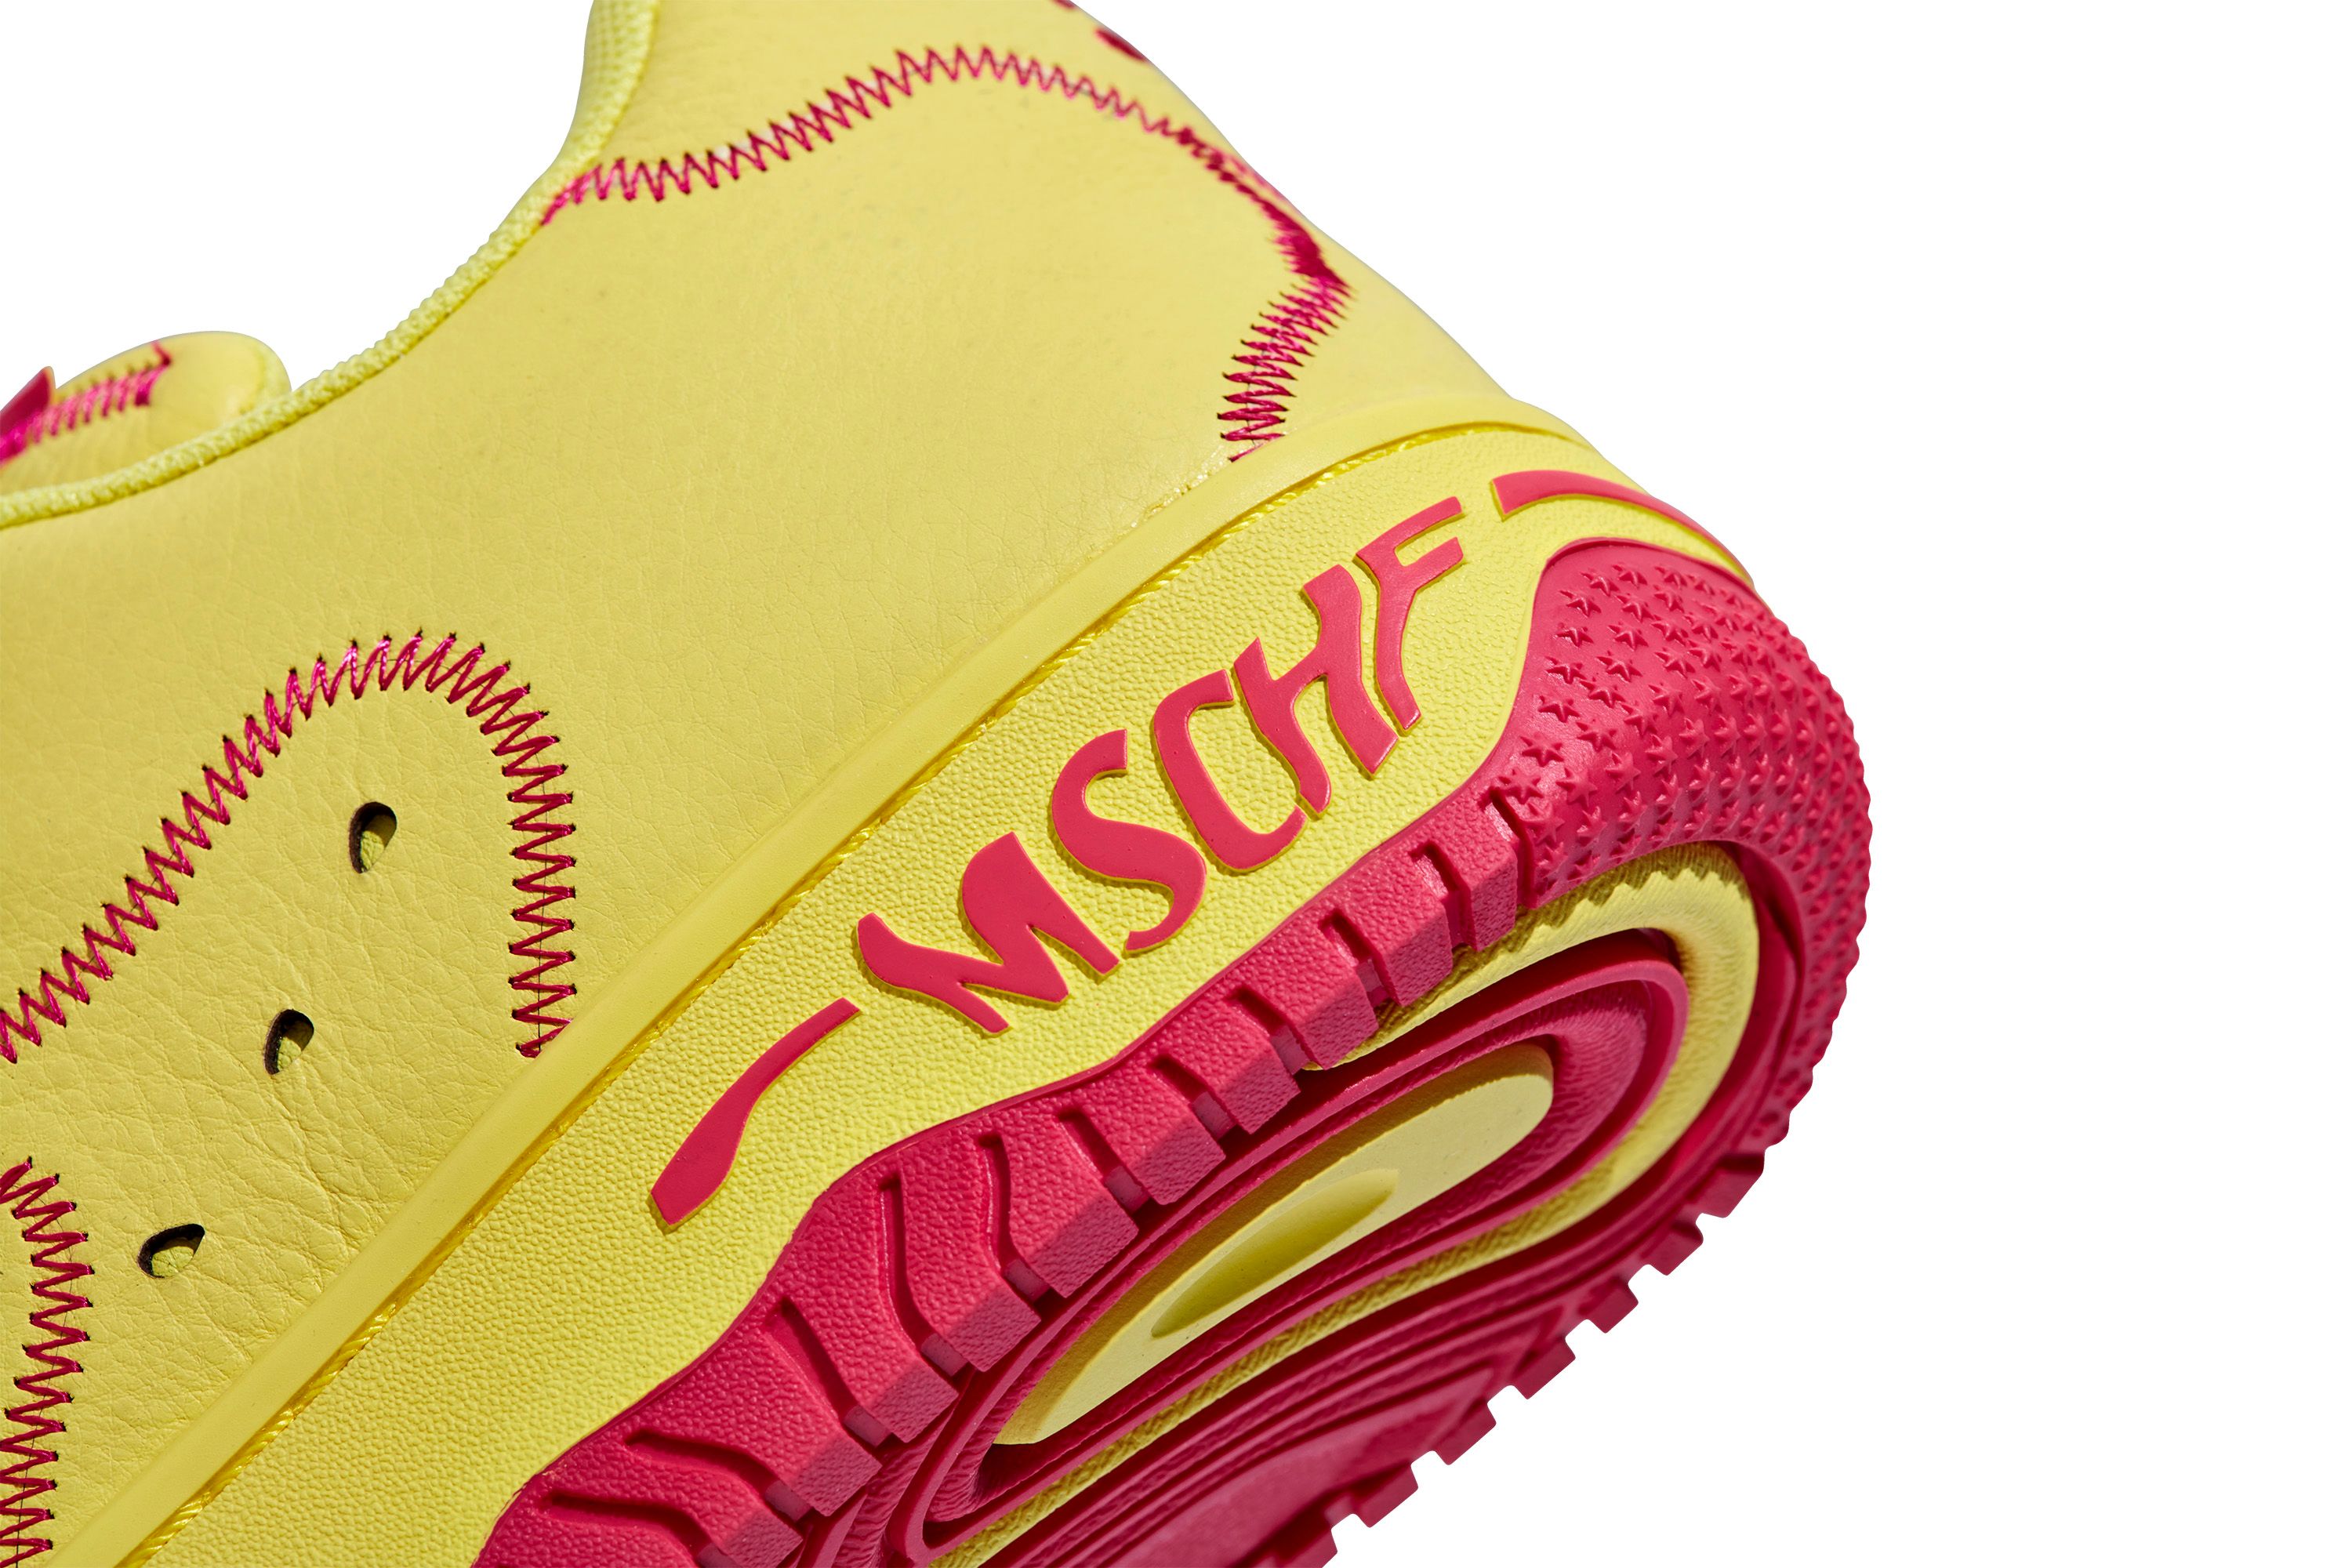 TheSiteSupply Images MSCHF Super Normal 2 “Raspberry Lemonade” F&F 230605 Shoes 8676 Release Info